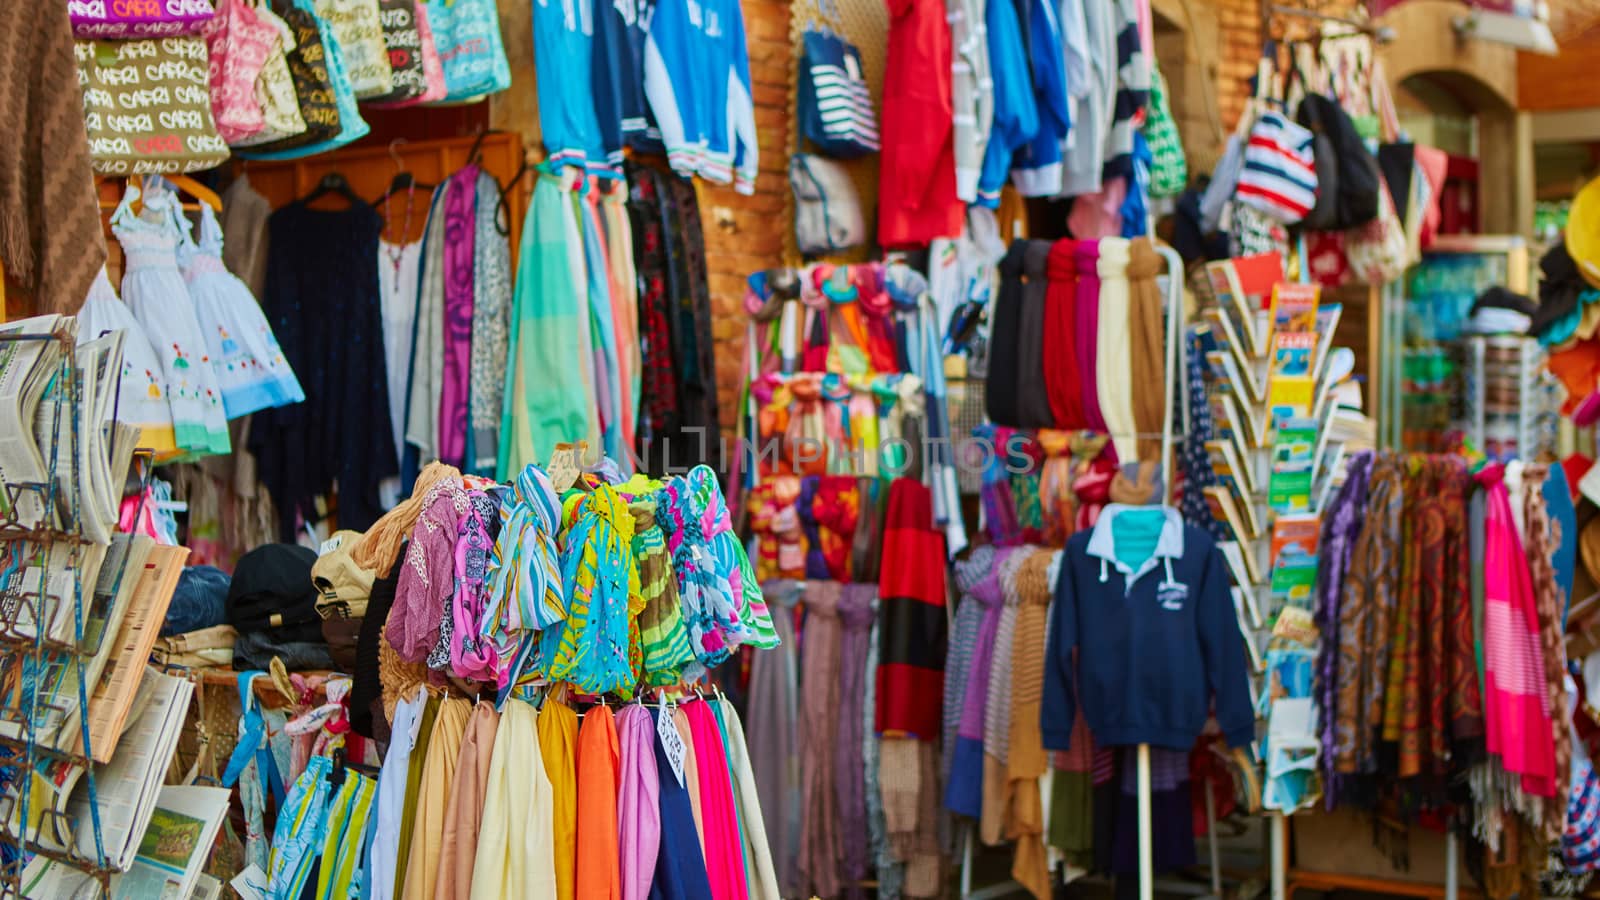 Rows of colourful silk scarfs hanging at a market stall in Sorrento, Italy